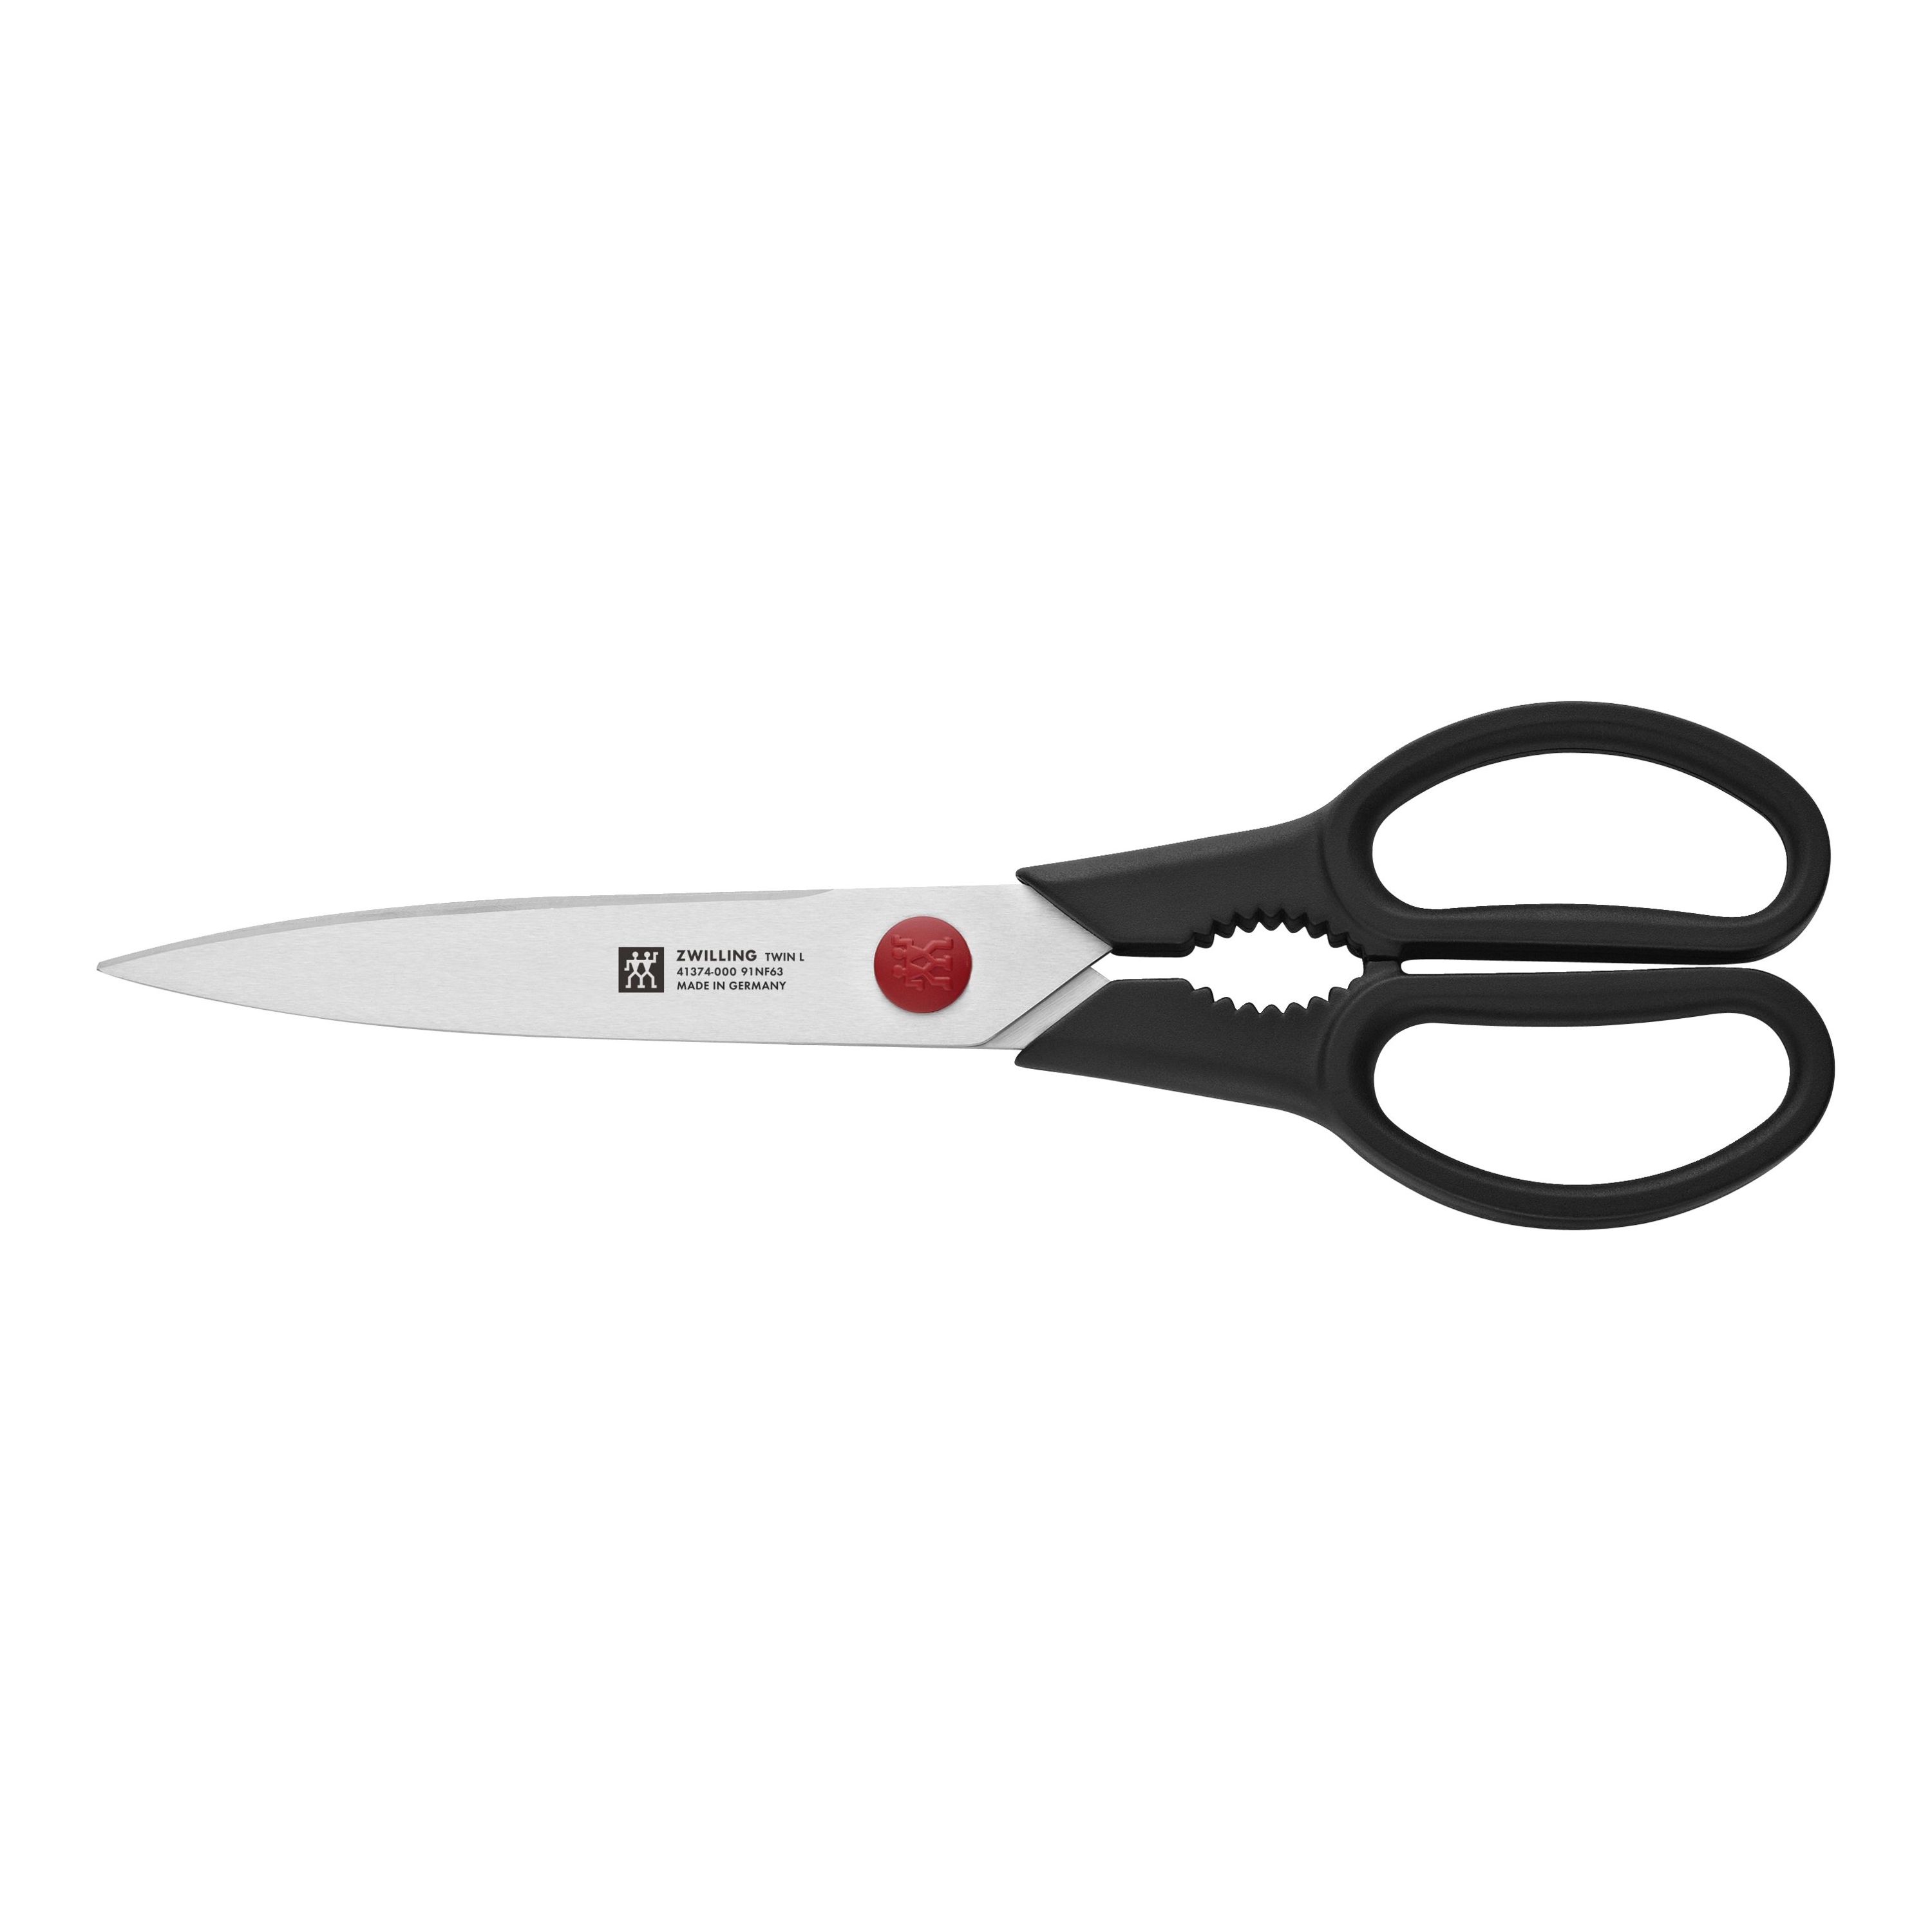 https://www.zwilling.com/on/demandware.static/-/Sites-zwilling-master-catalog/default/dwc3193aa5/images/large/41374-000.jpg